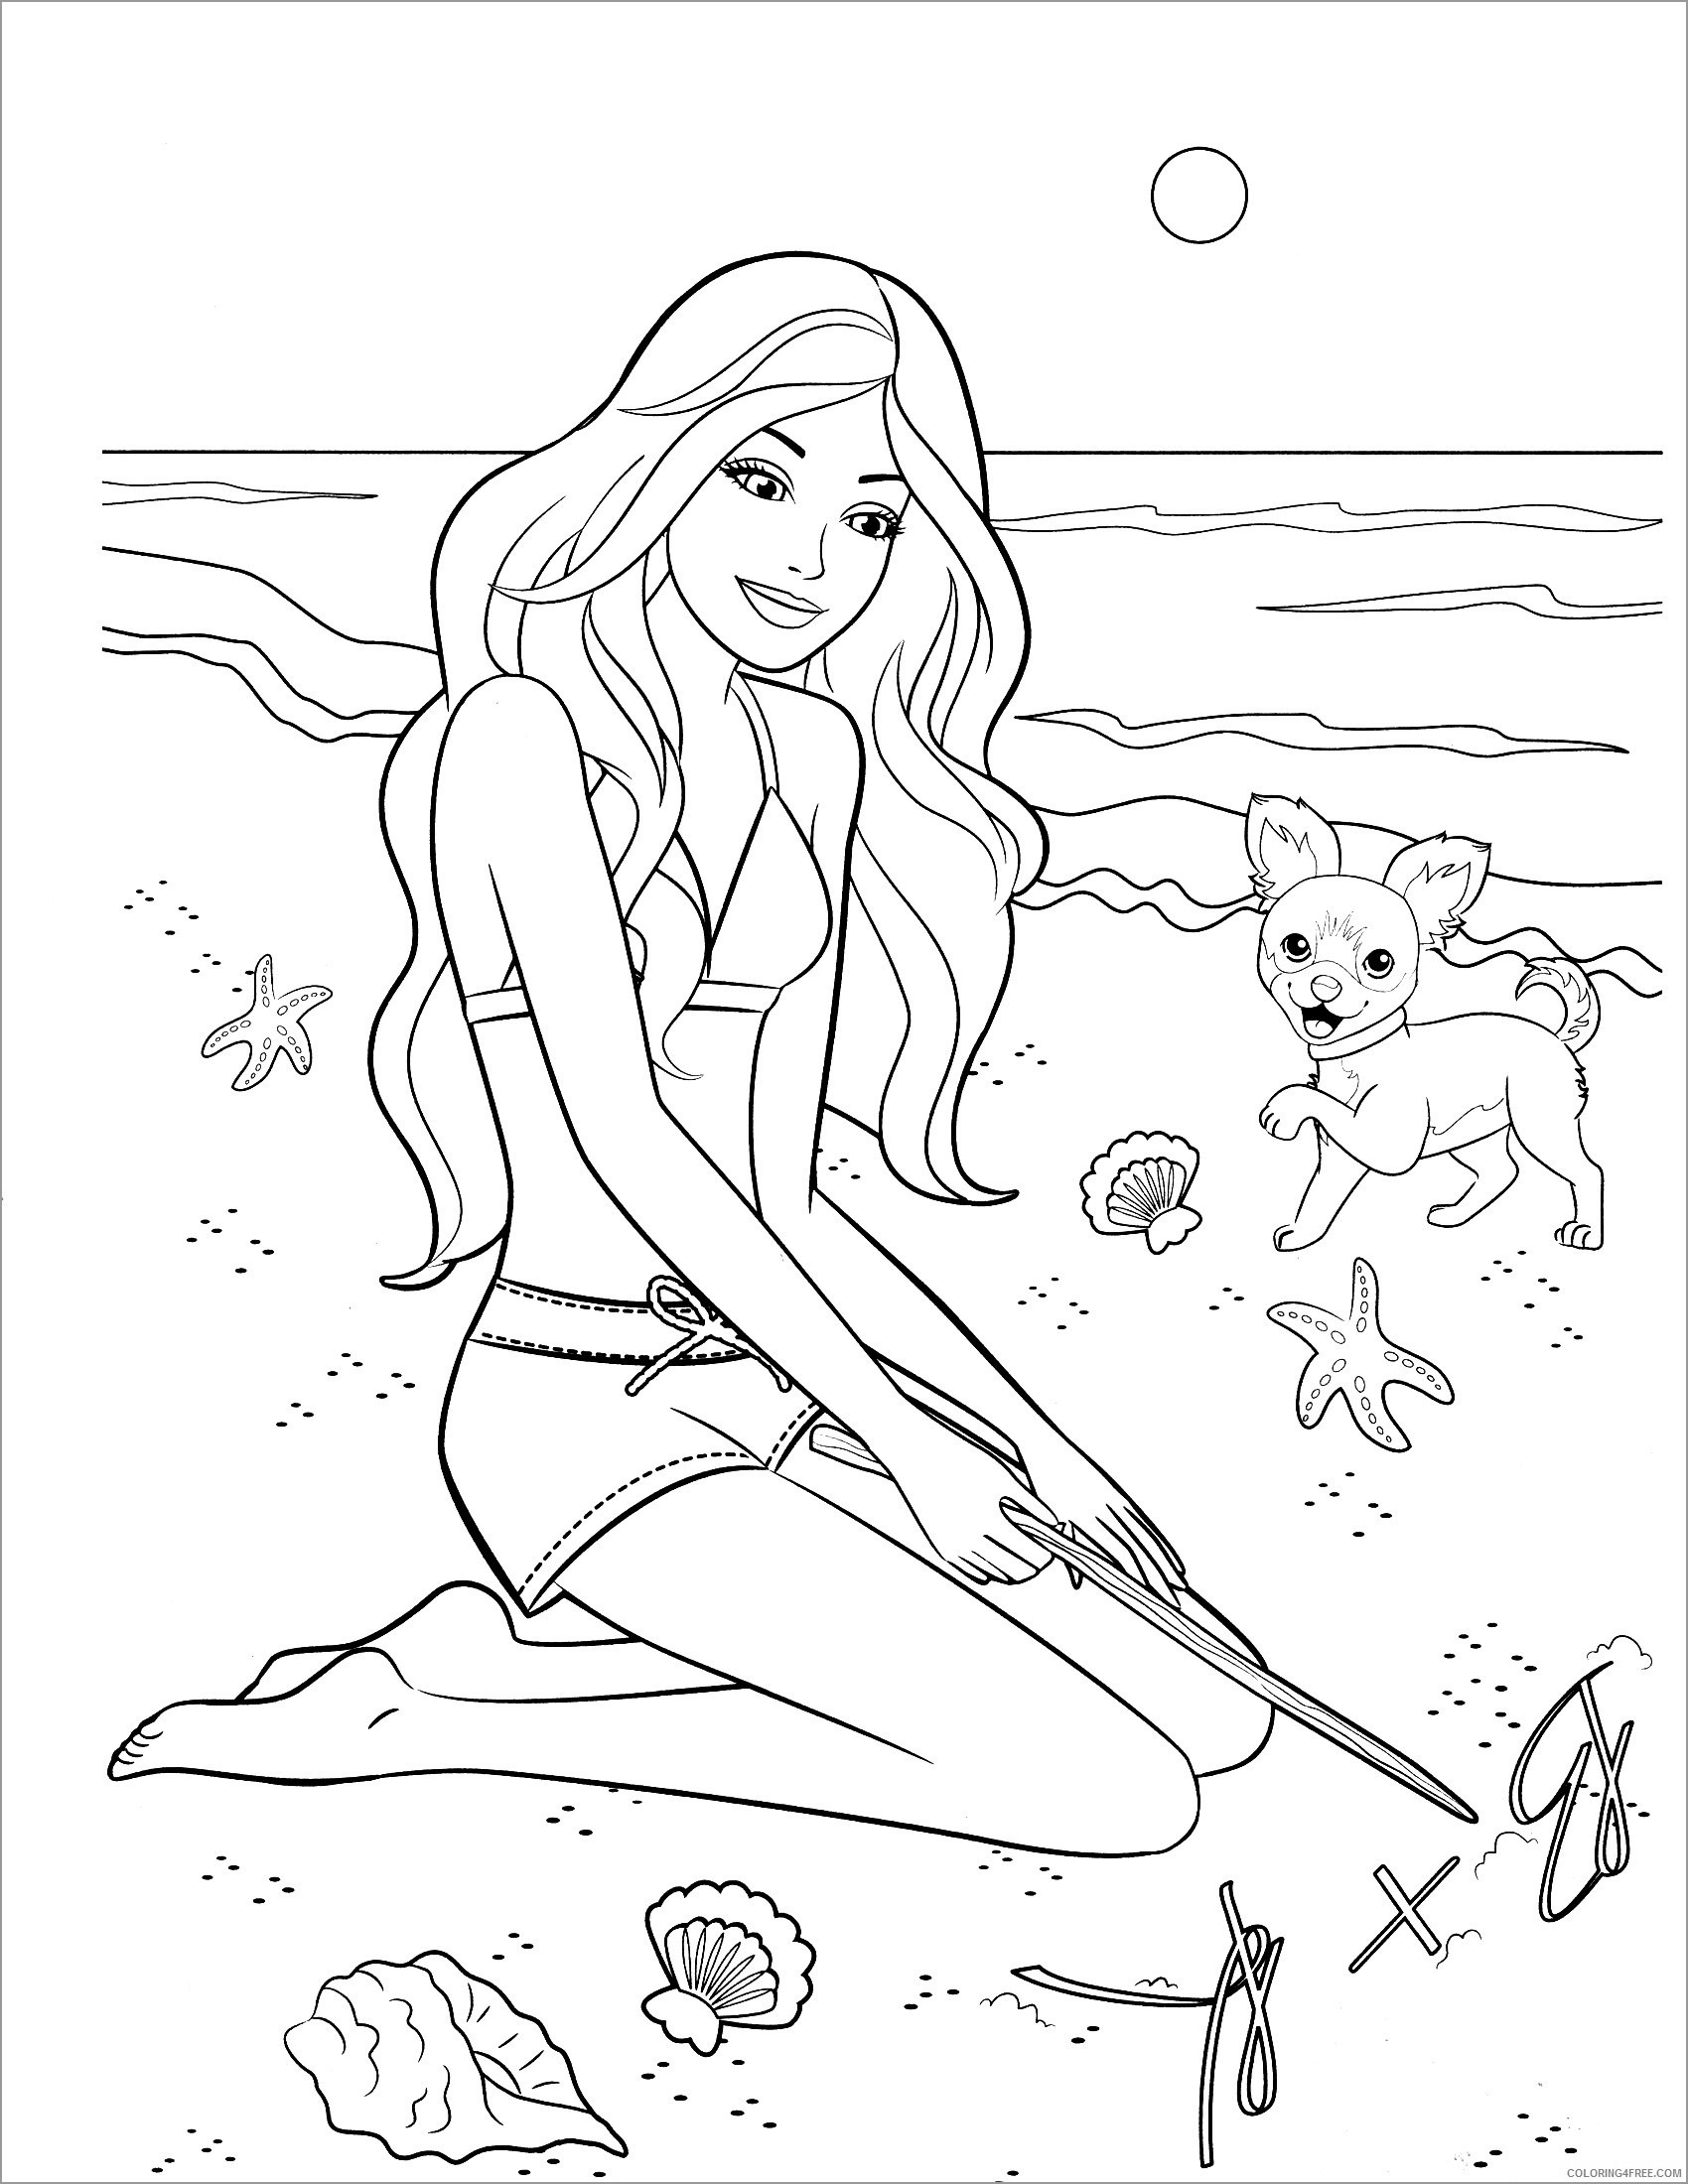 Barbie at the Beach Coloring Page for Kids   ColoringBay